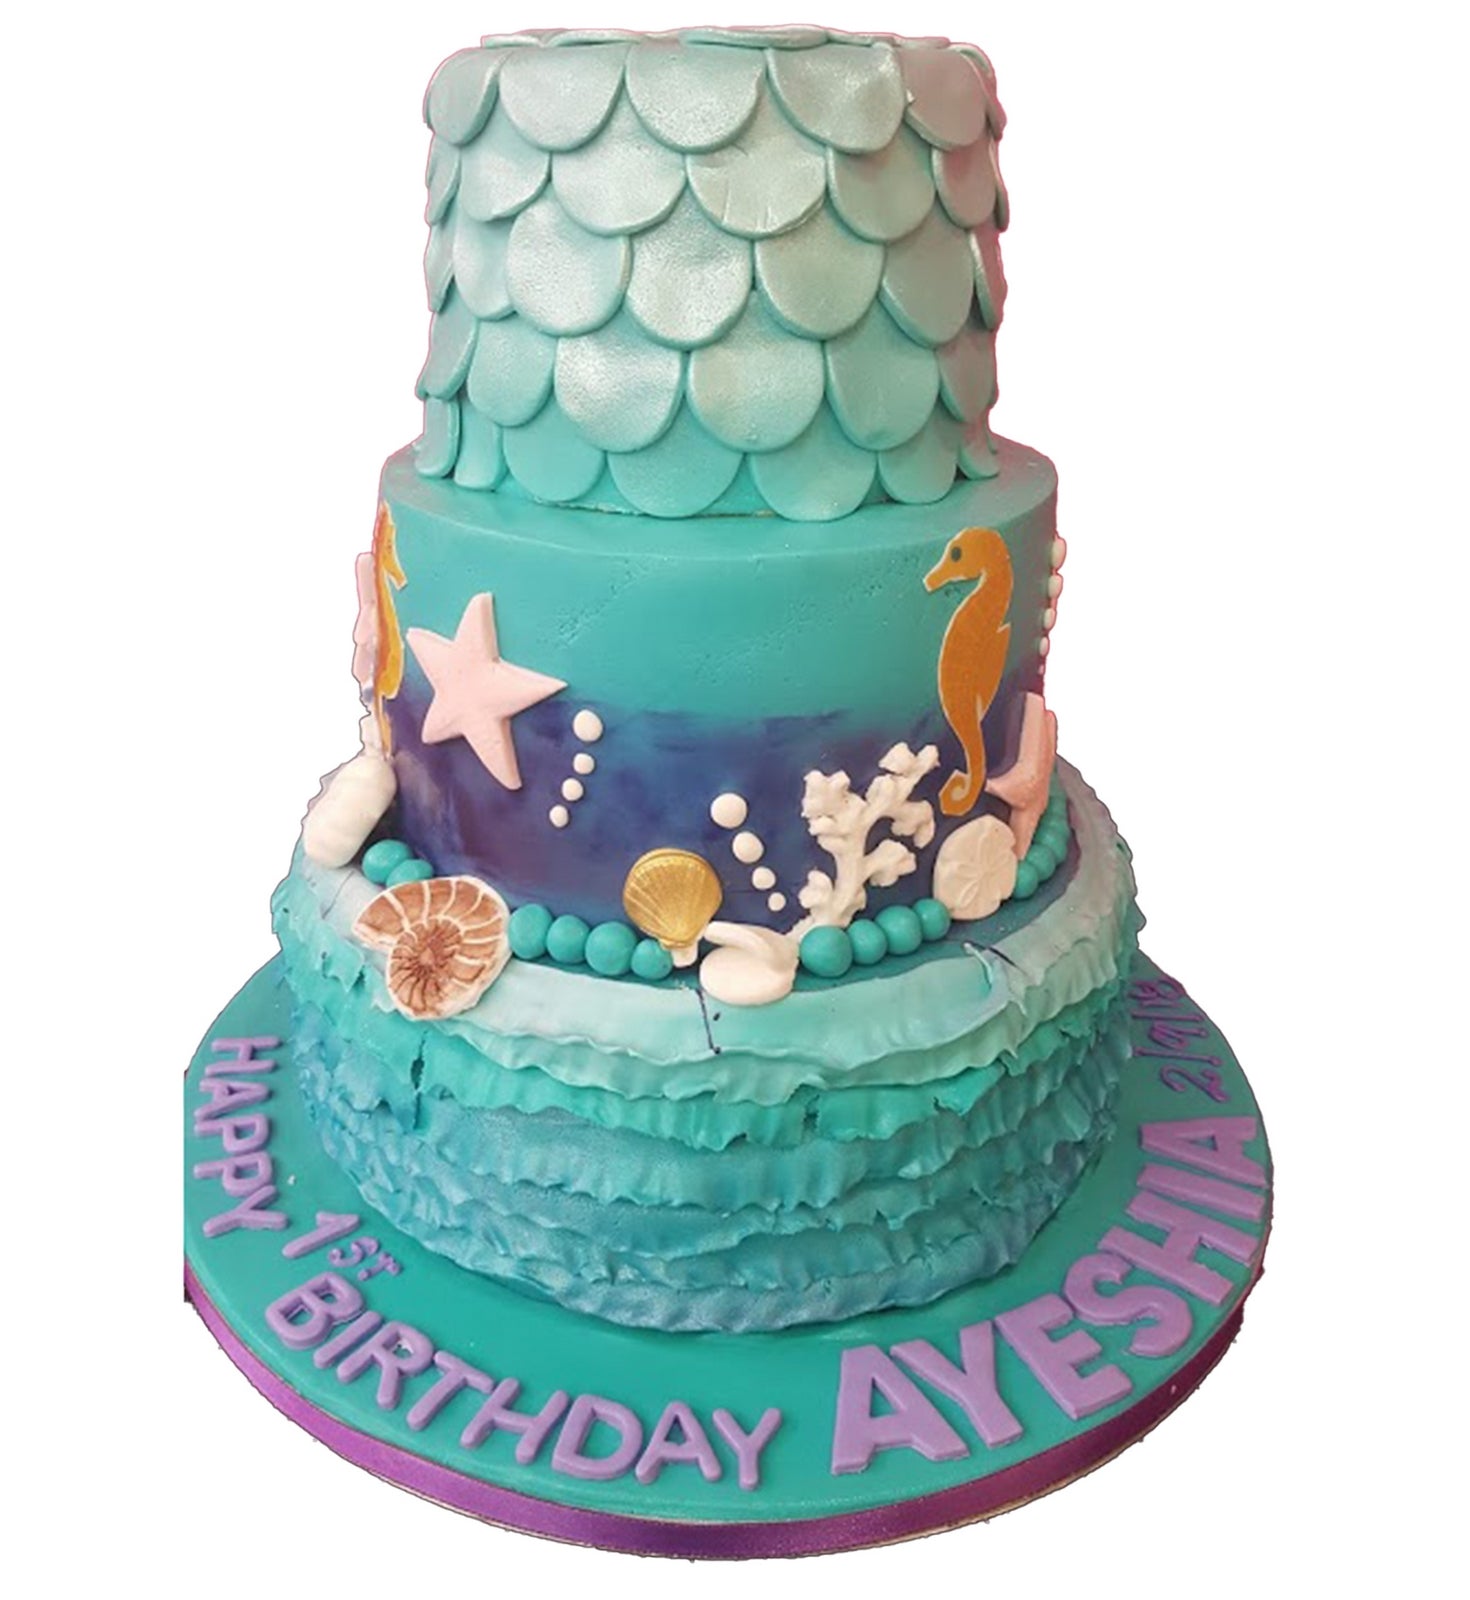 Water Theme Cakes | Occasionkart cakes| Theme Cakes Hyderabad| Best Cakes  Near Me|